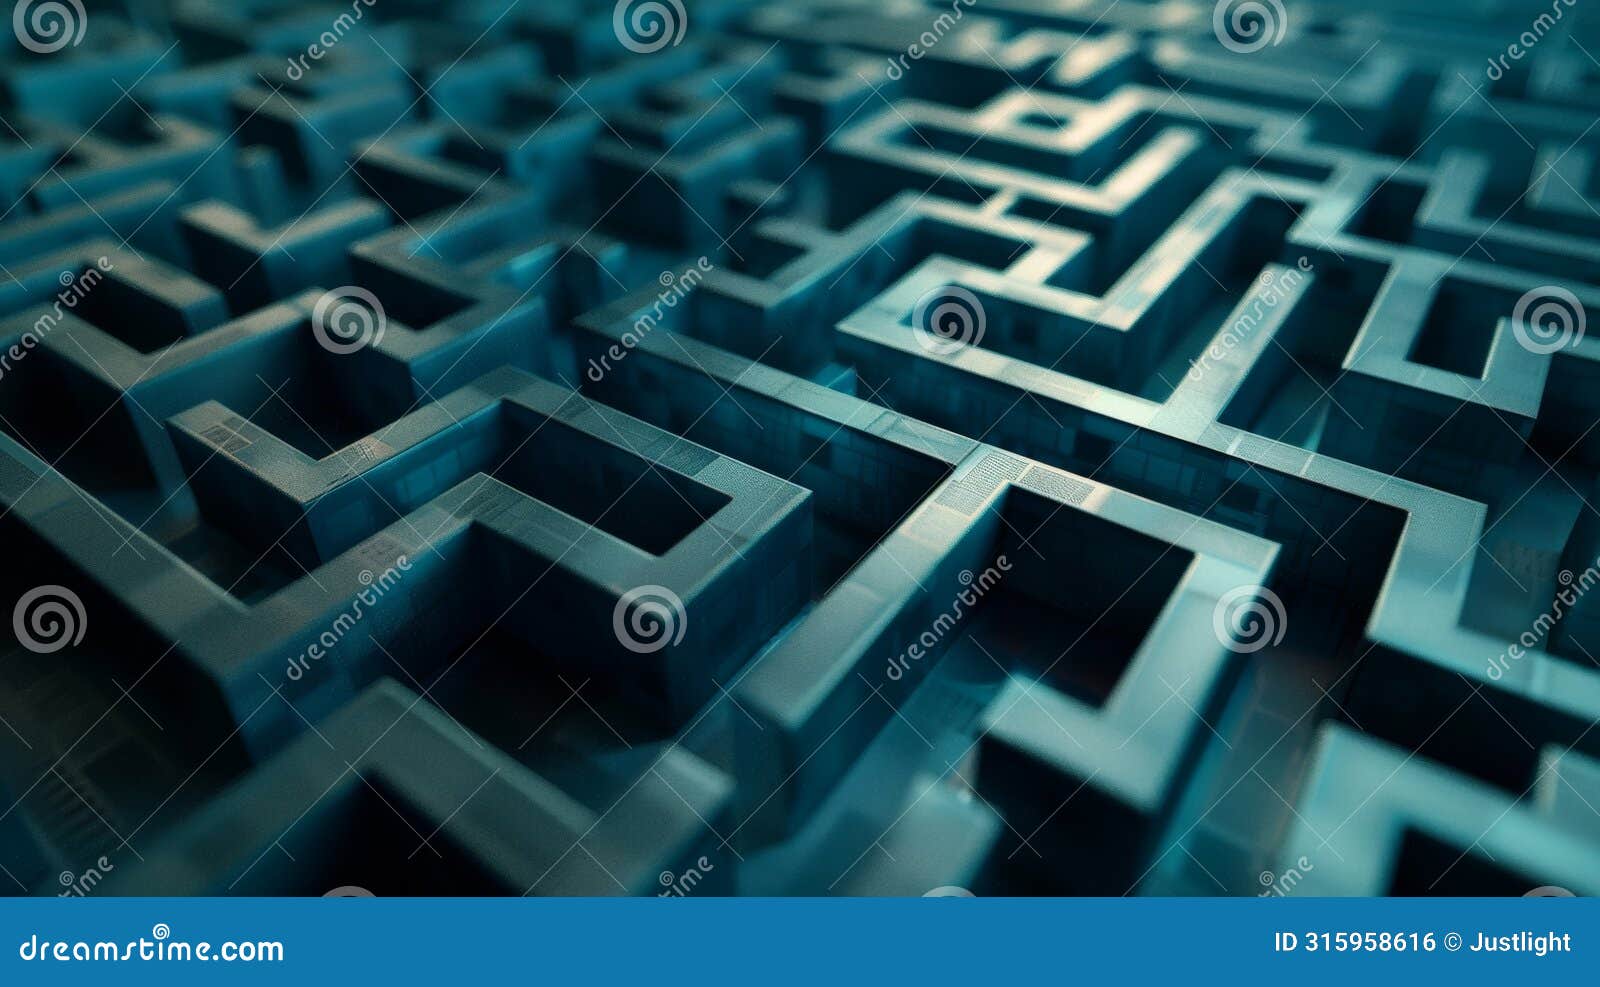 a maze represents the complex and confusing network of internet ship and control measures put in place by governments.